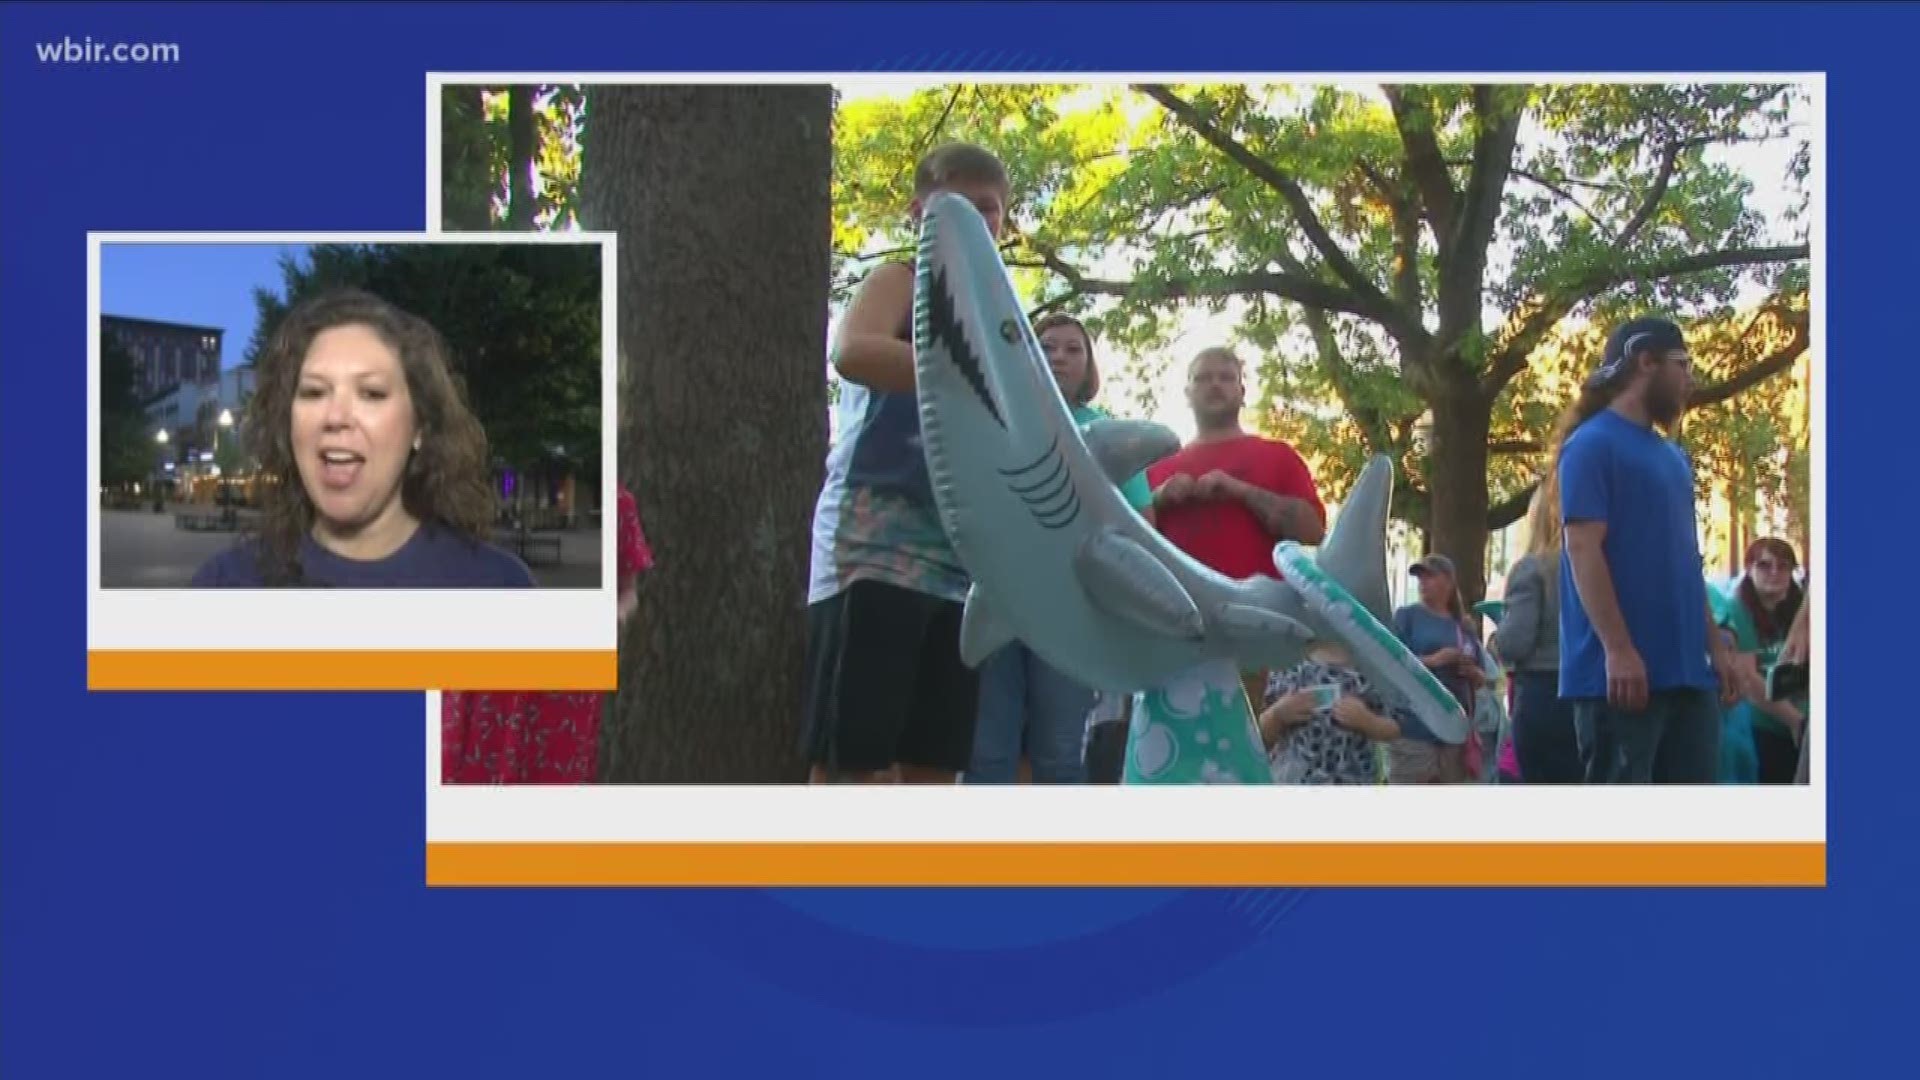 Discovery Channel's Shark Week is next week and you can already get in the spirit today. WBIR 10 News Reporter Leslie Ackerson is live with more on the big event in Market Square.